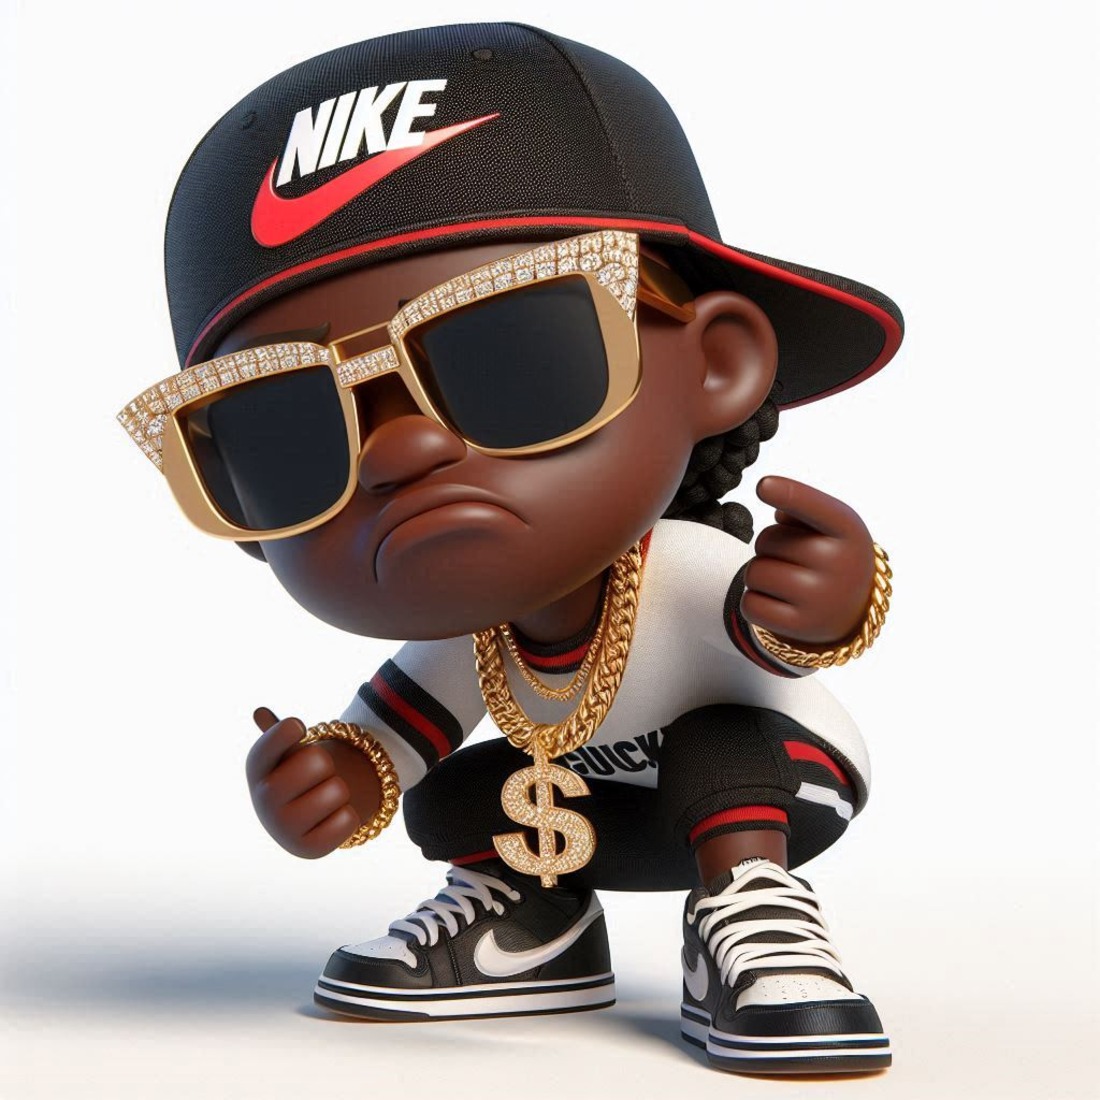 Nike Urban Street Wear 3D Gangsta Rap Collectible Characters 4th Edition preview image.